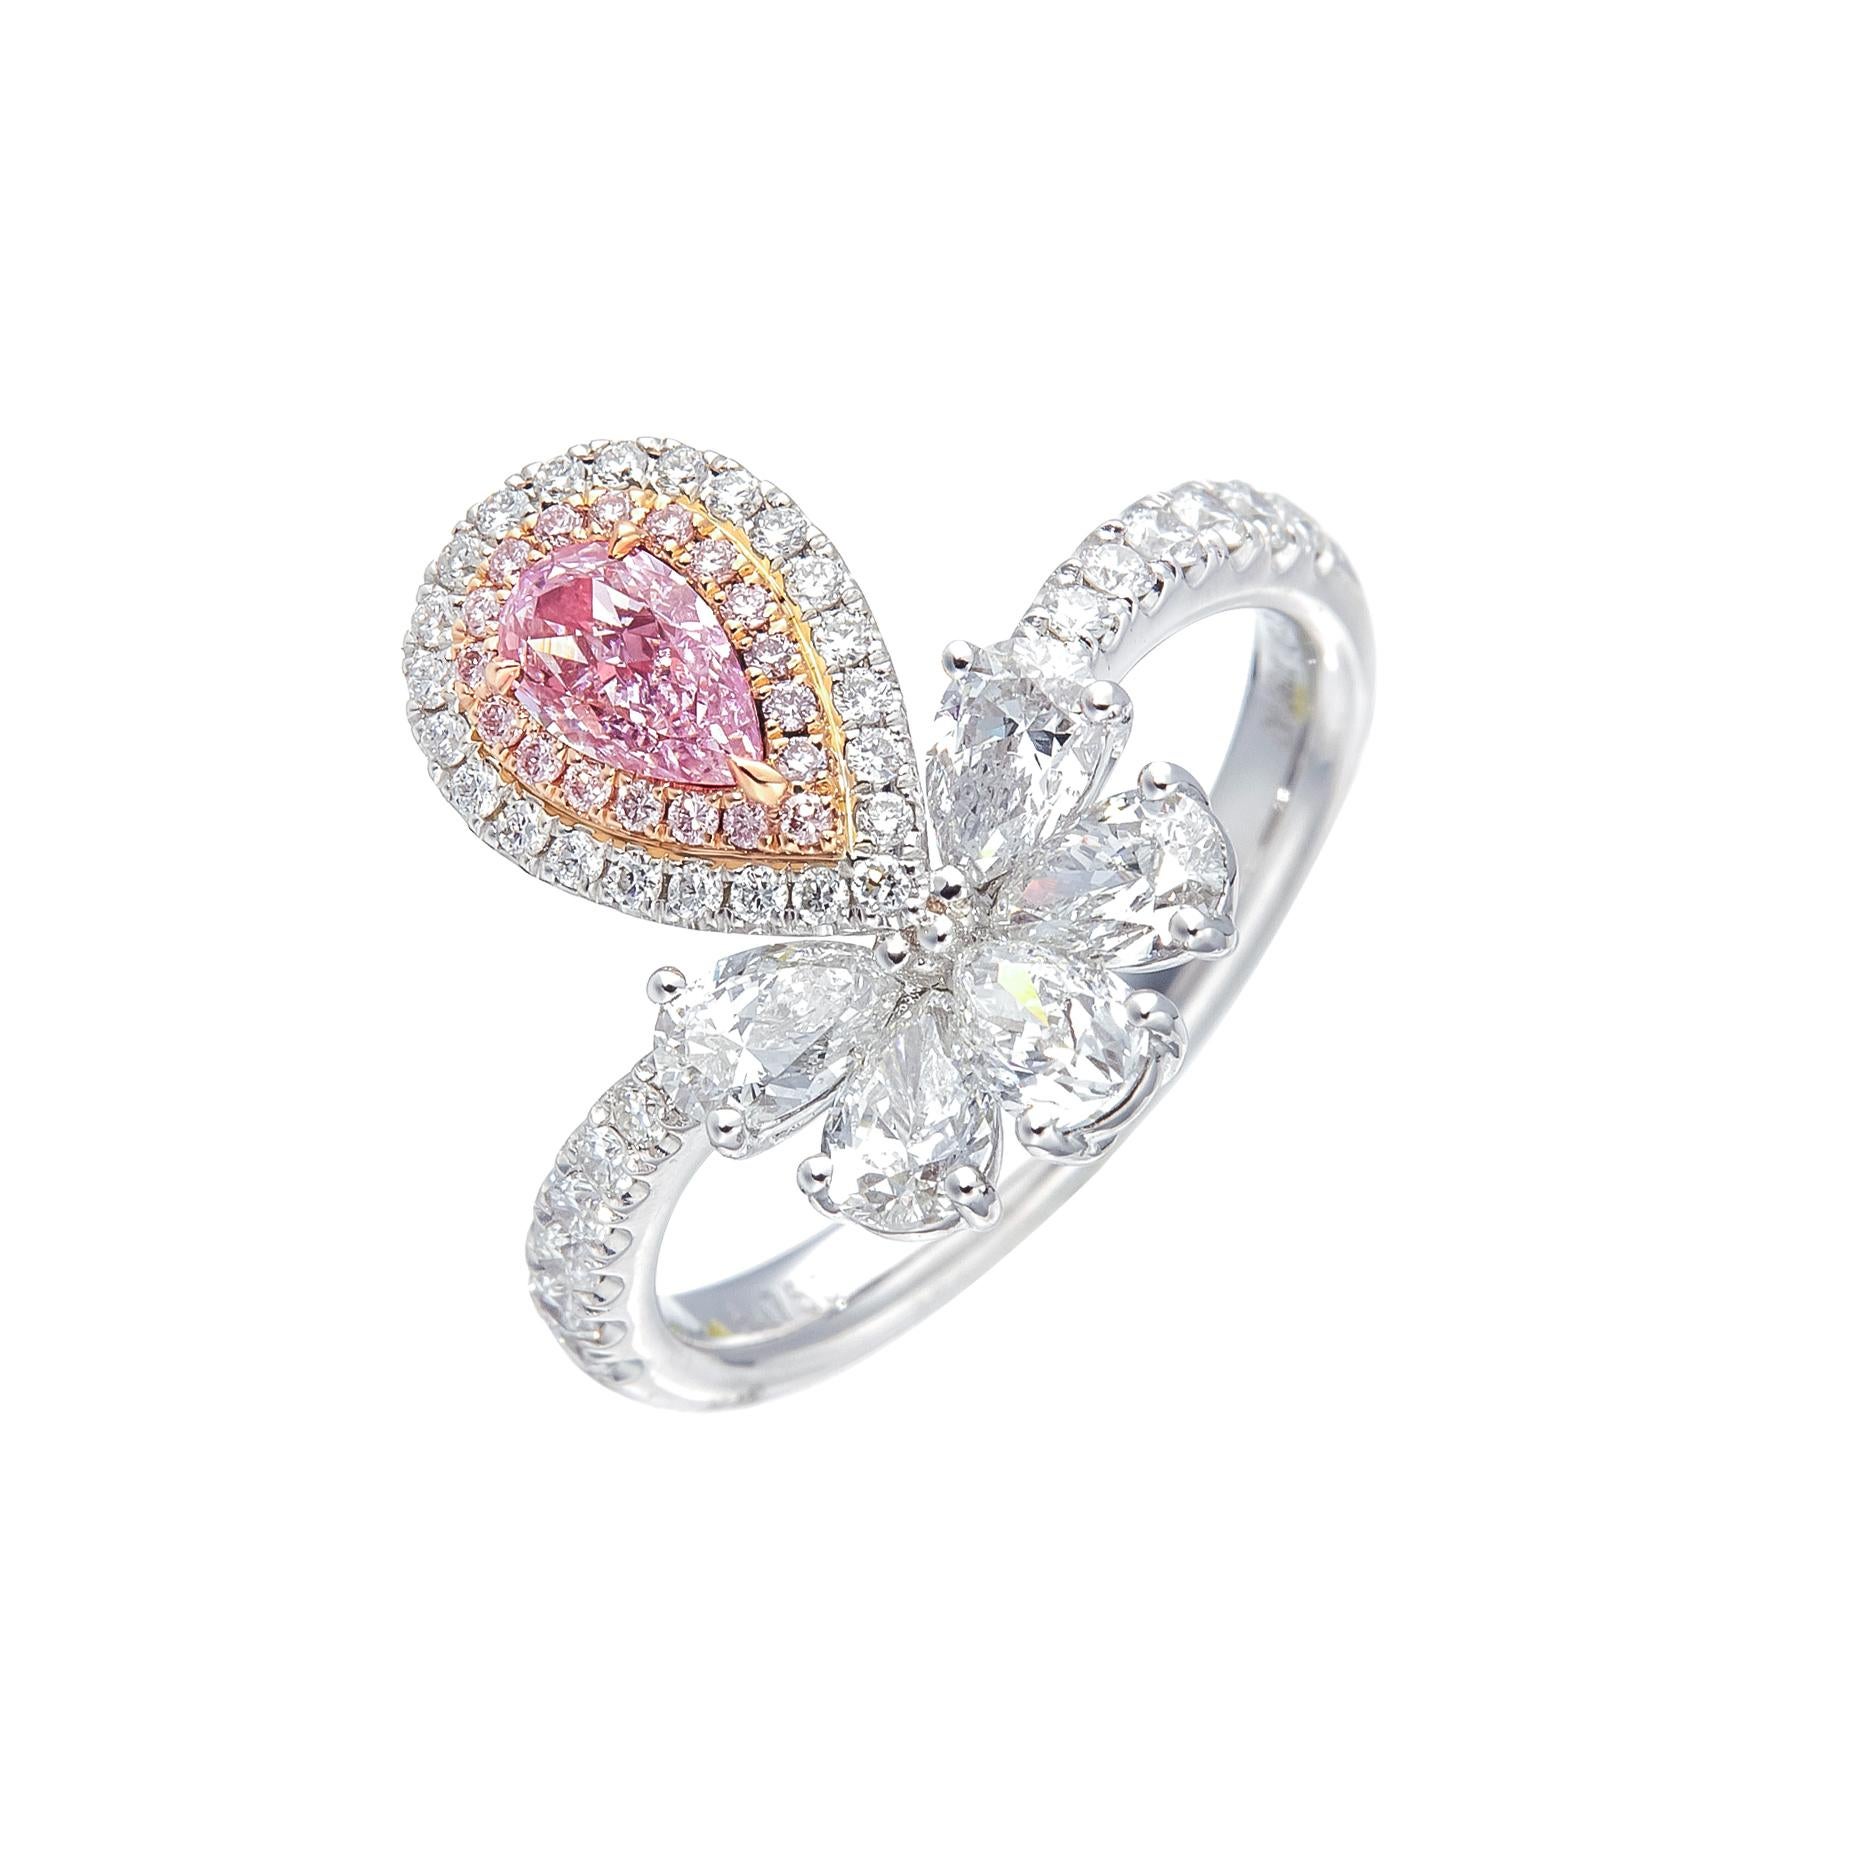 This exquisite piece of jewelry features a stunning 0.36-carat light pink pear-shaped diamond that has been certified by the Gemological Institute of America (GIA). The diamond is mounted on 18-karat gold, which gives the piece a luxurious and